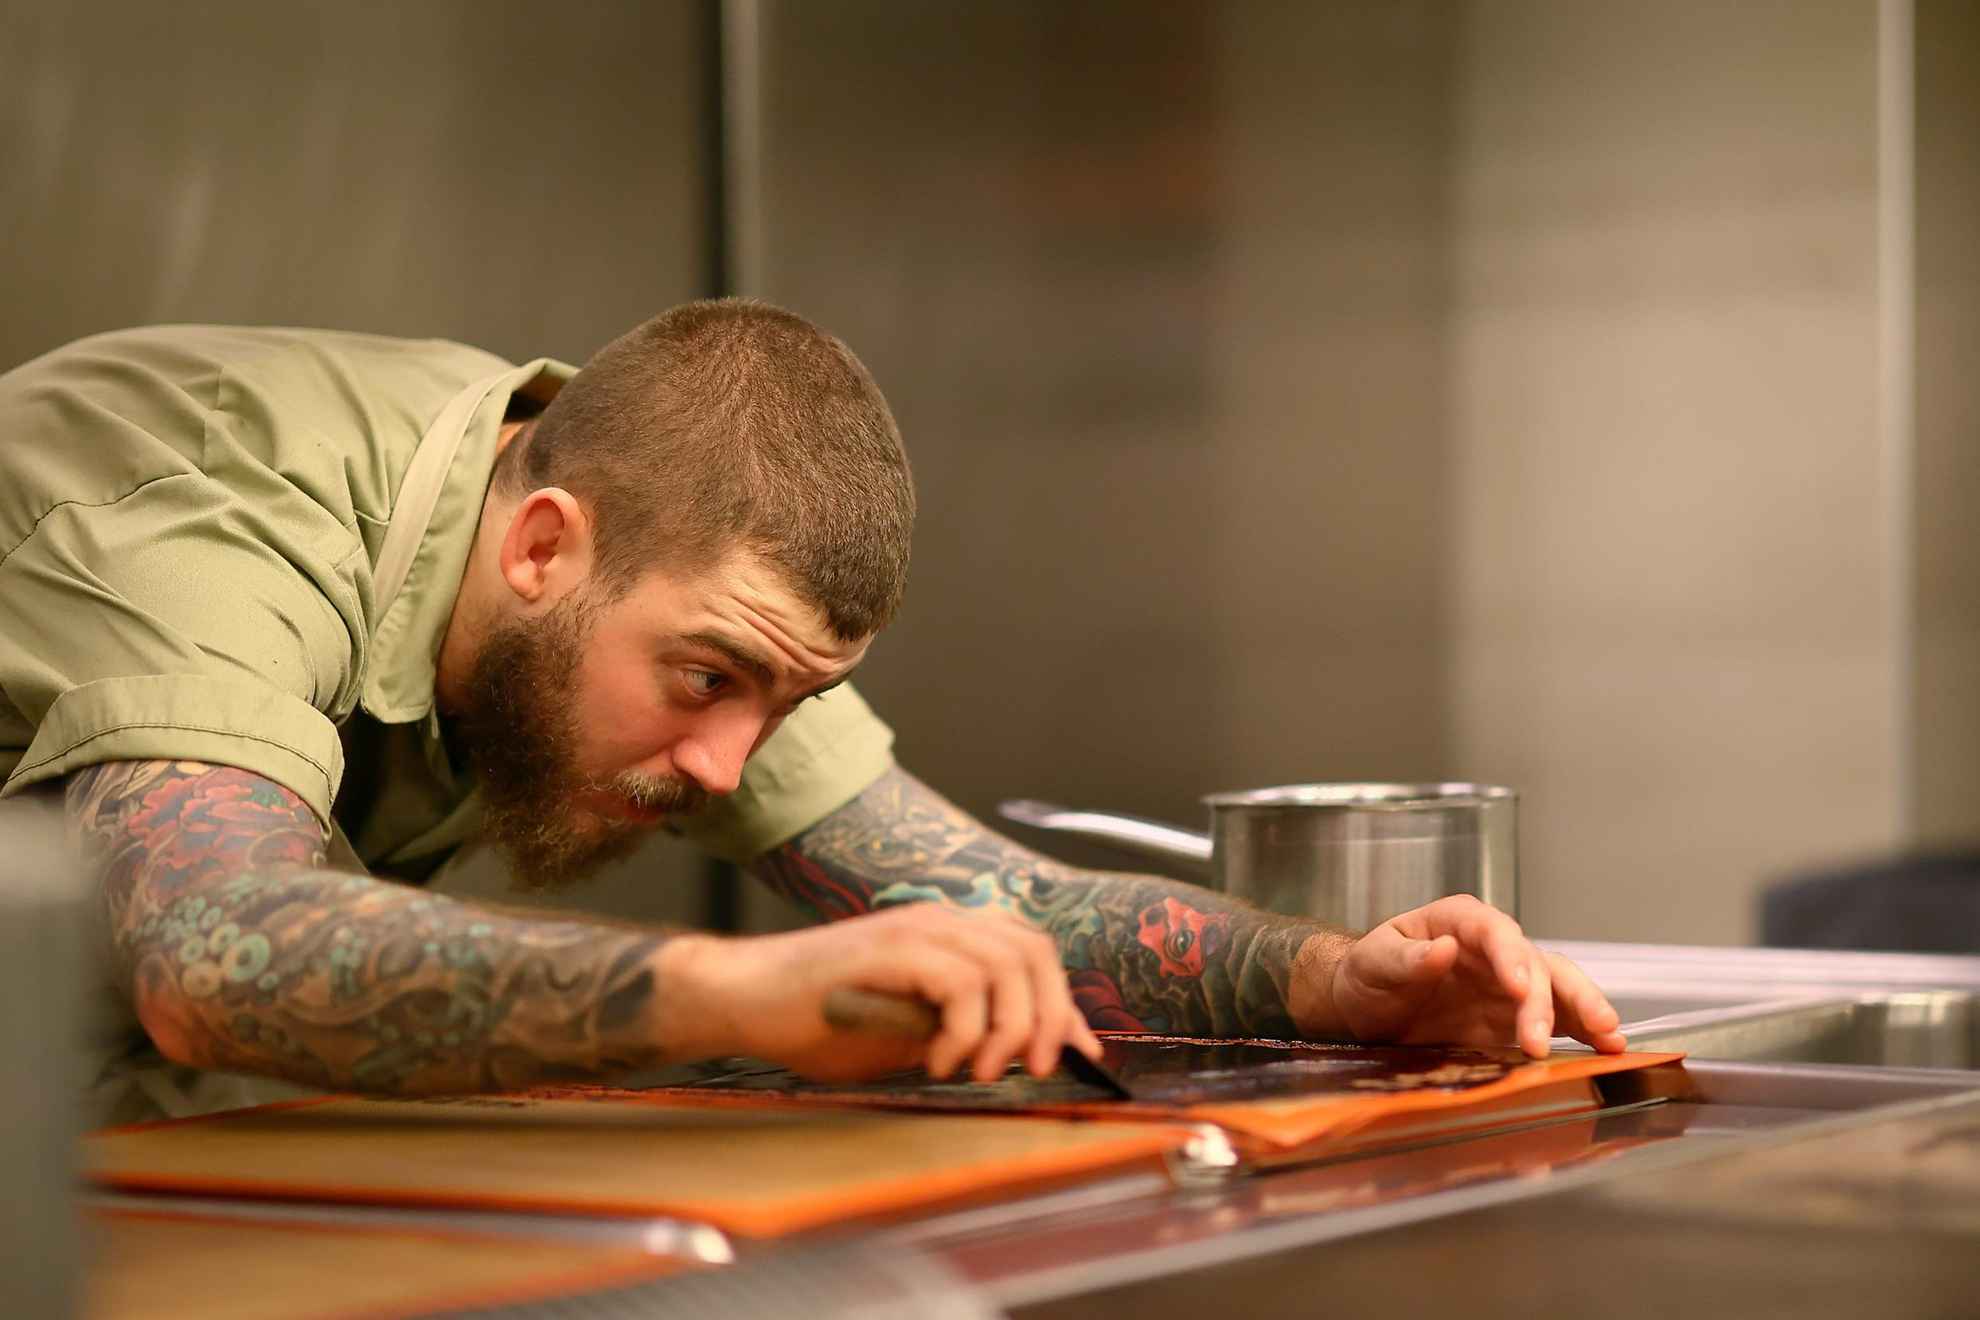 A chef looks concentrated preparing food.